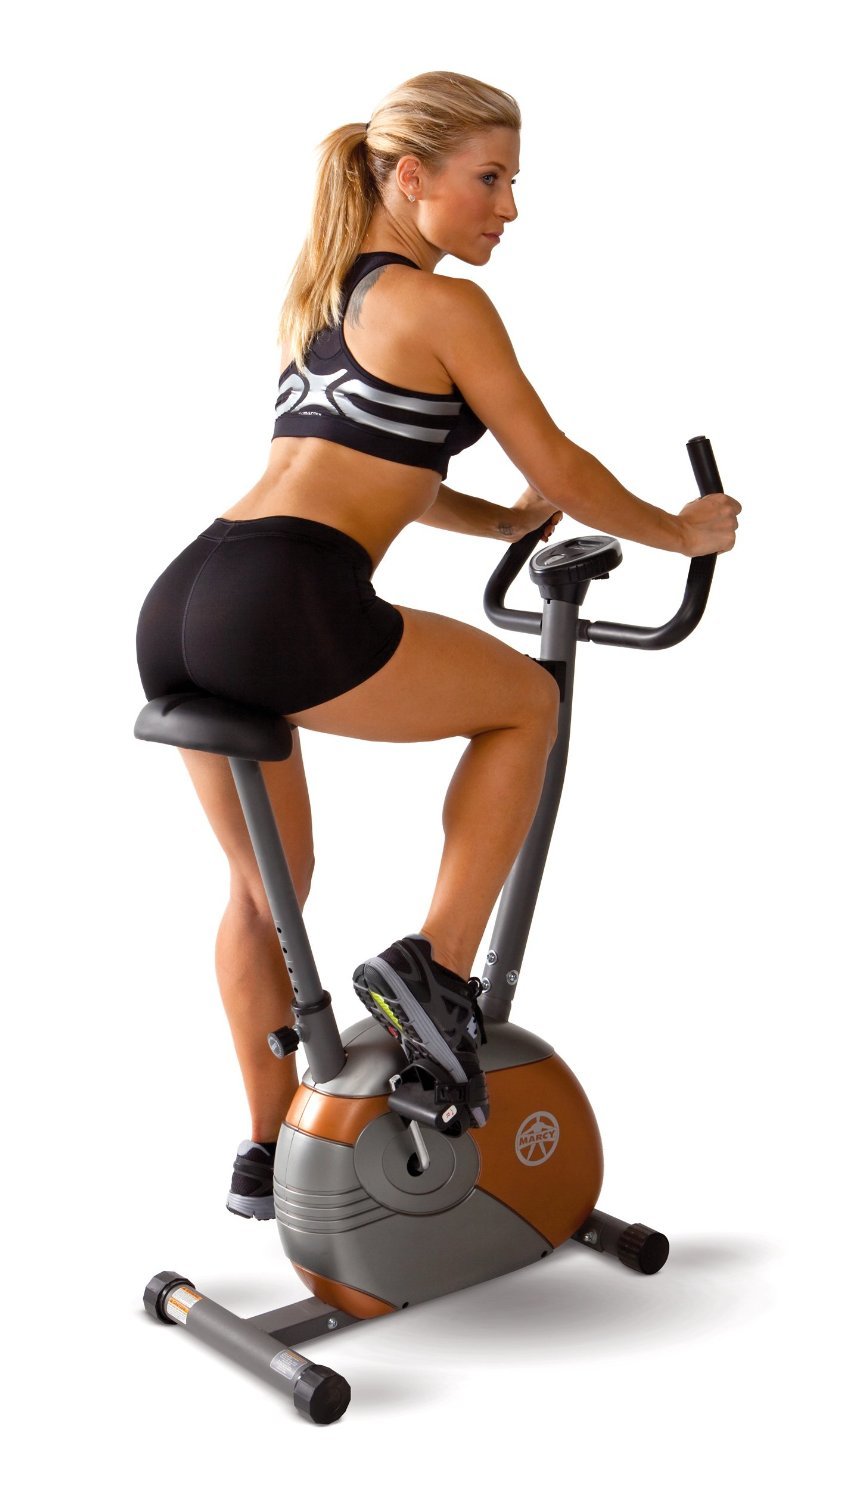 the Marcy Upright Mag Bike is one of the best upright exercise bikes